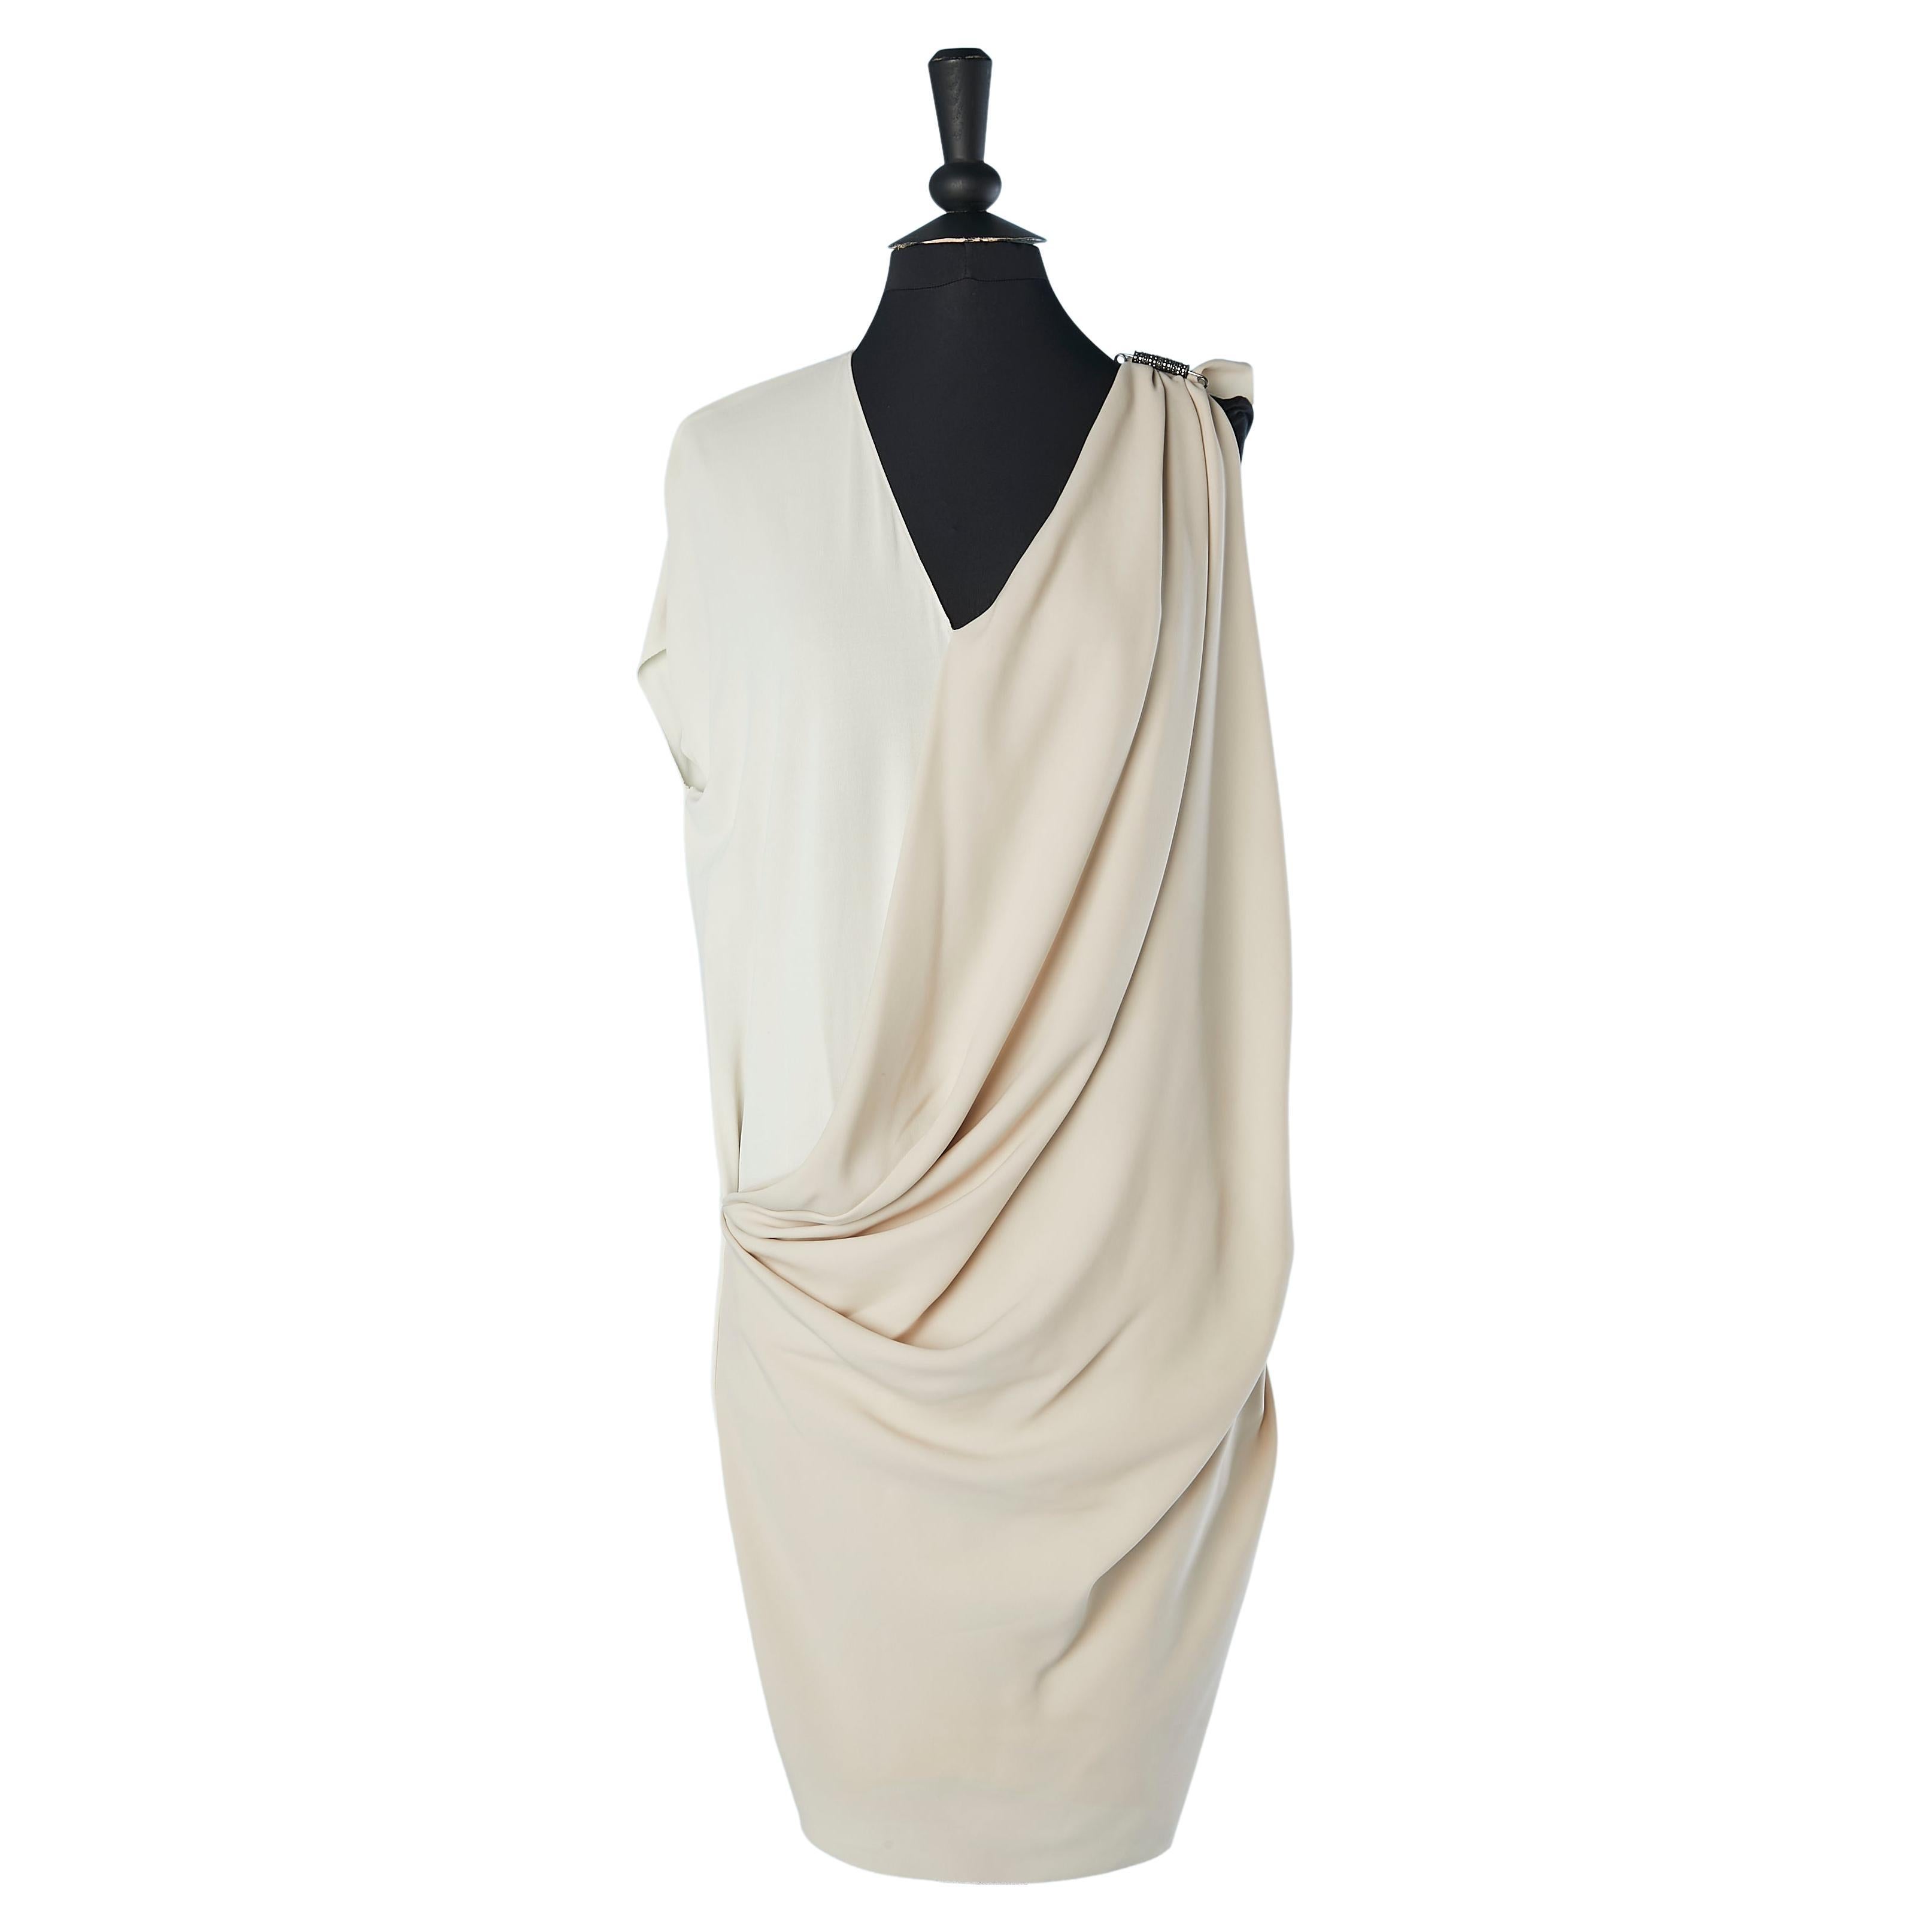 Beige and off-white jersey drape cocktail dress with jewelry safety pin Lanvin 